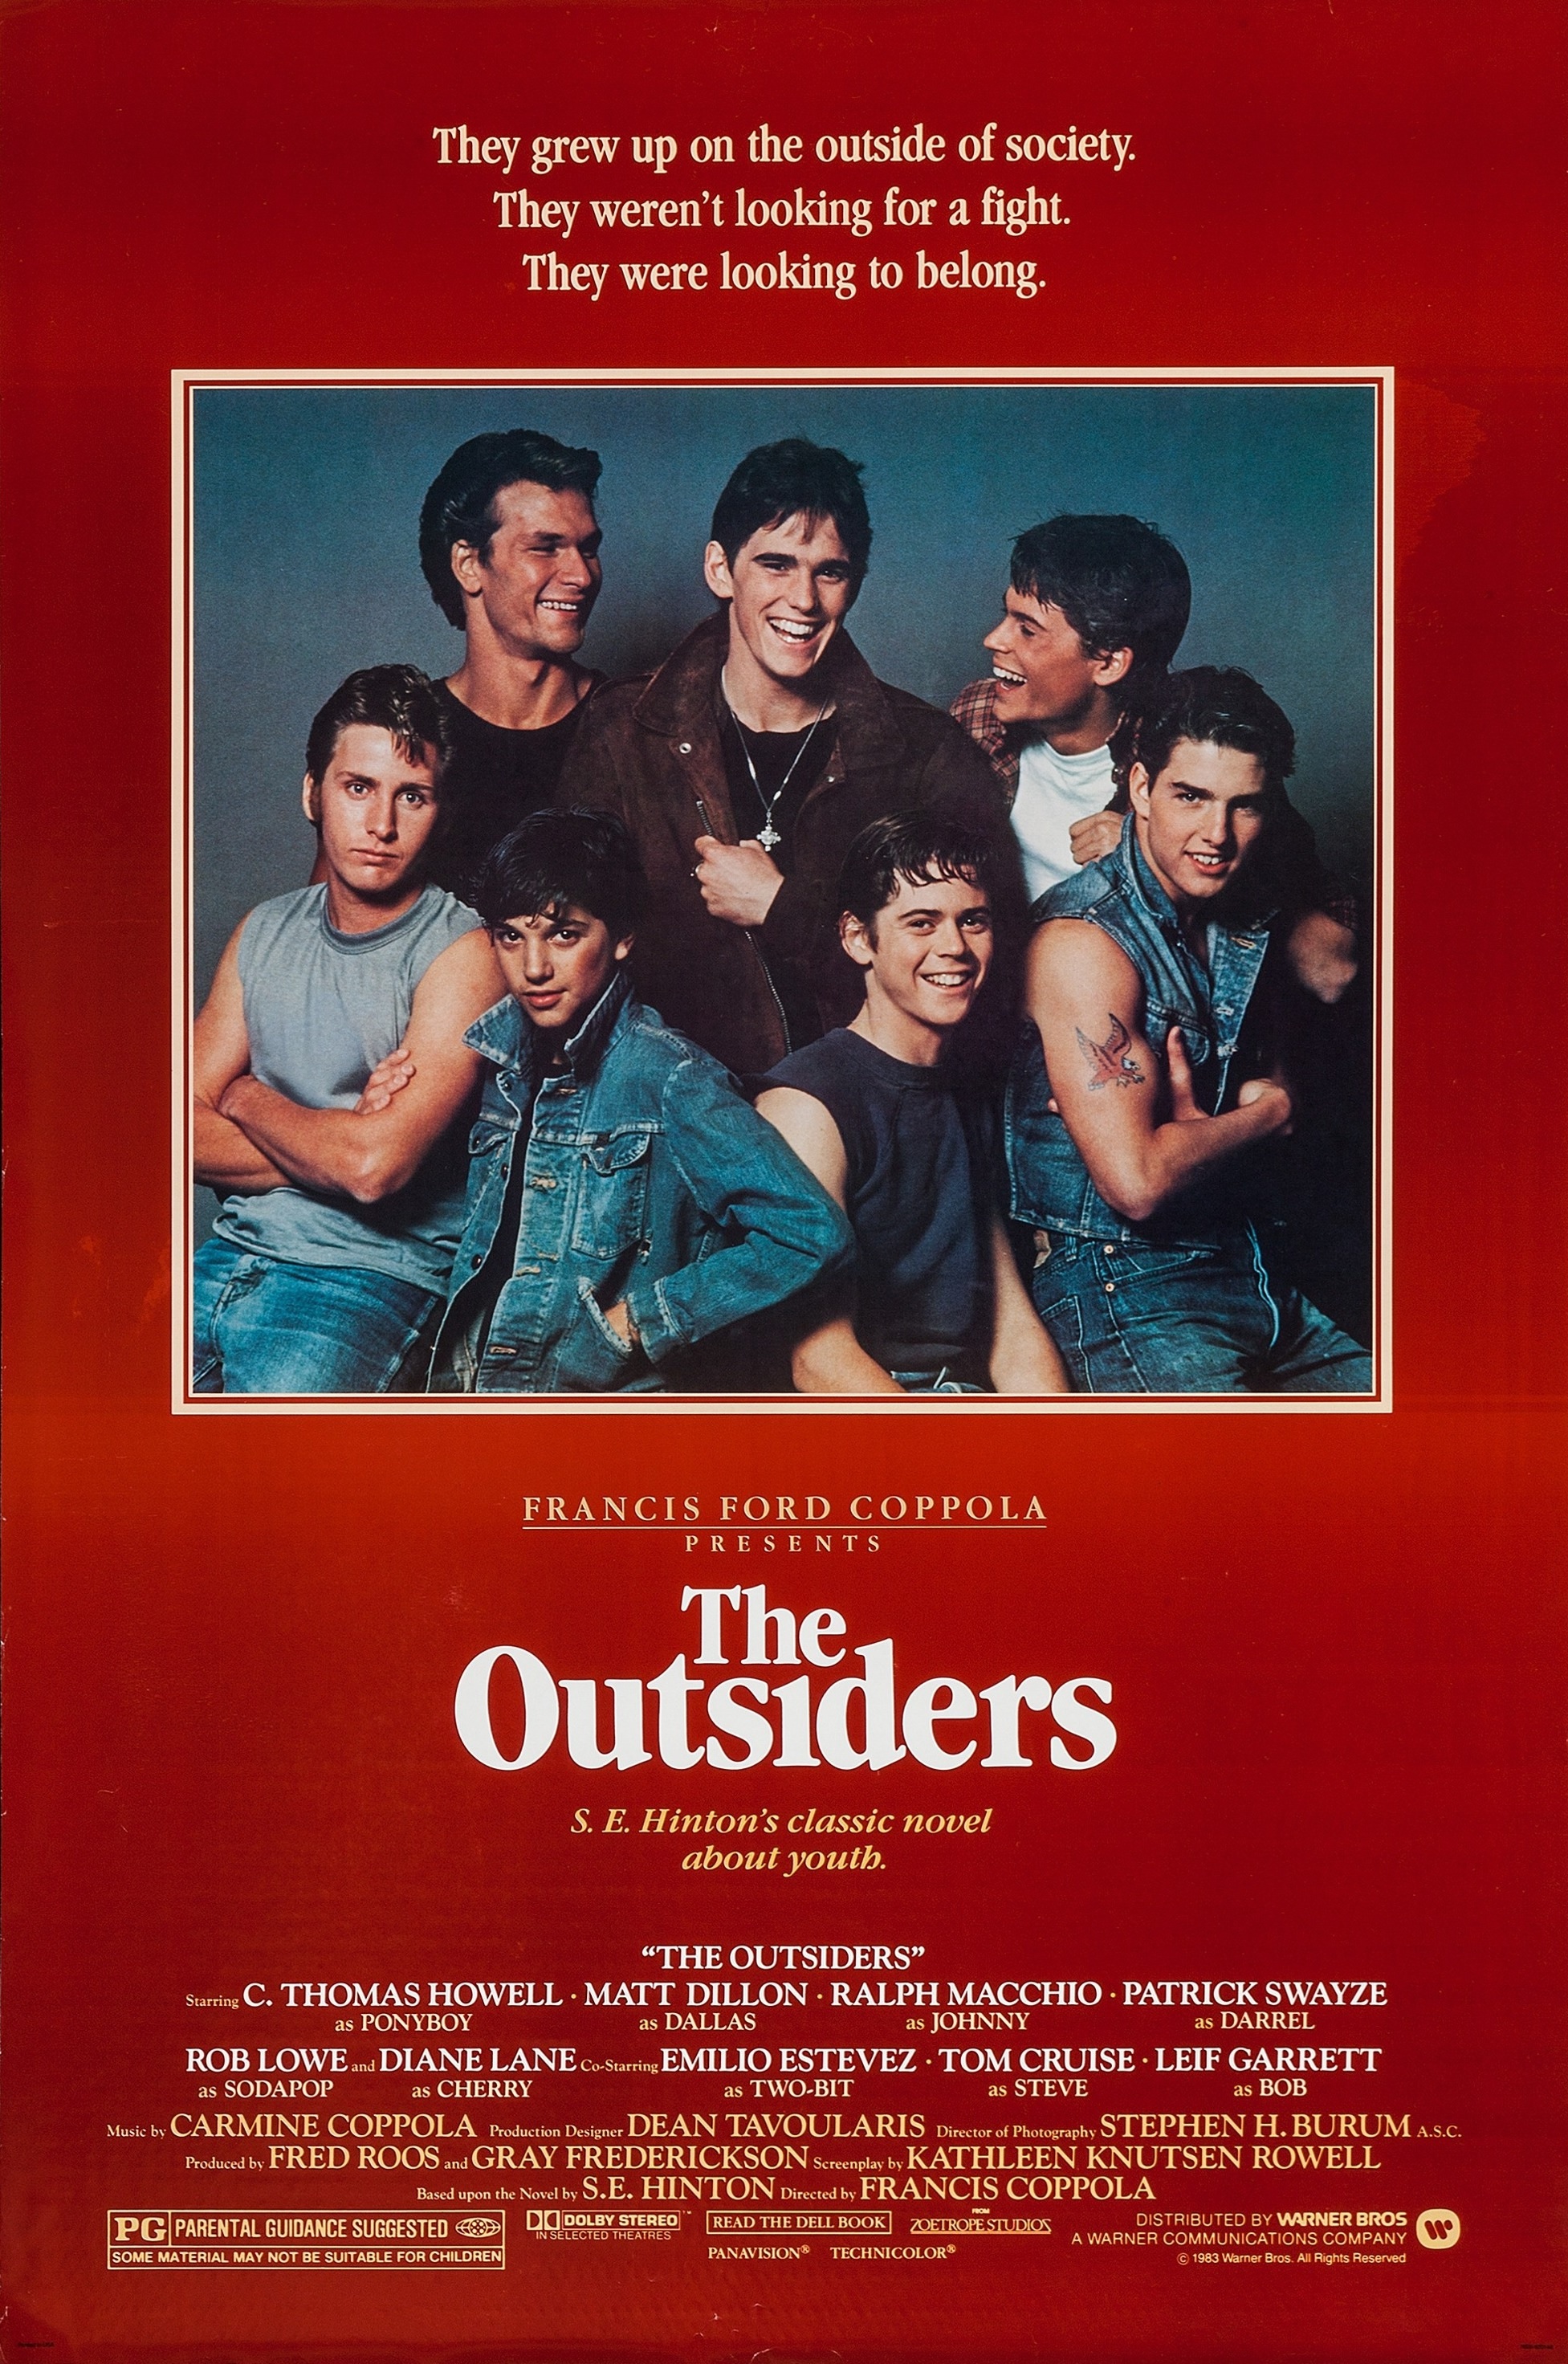 The Outsiders (film) Warner Bros photo